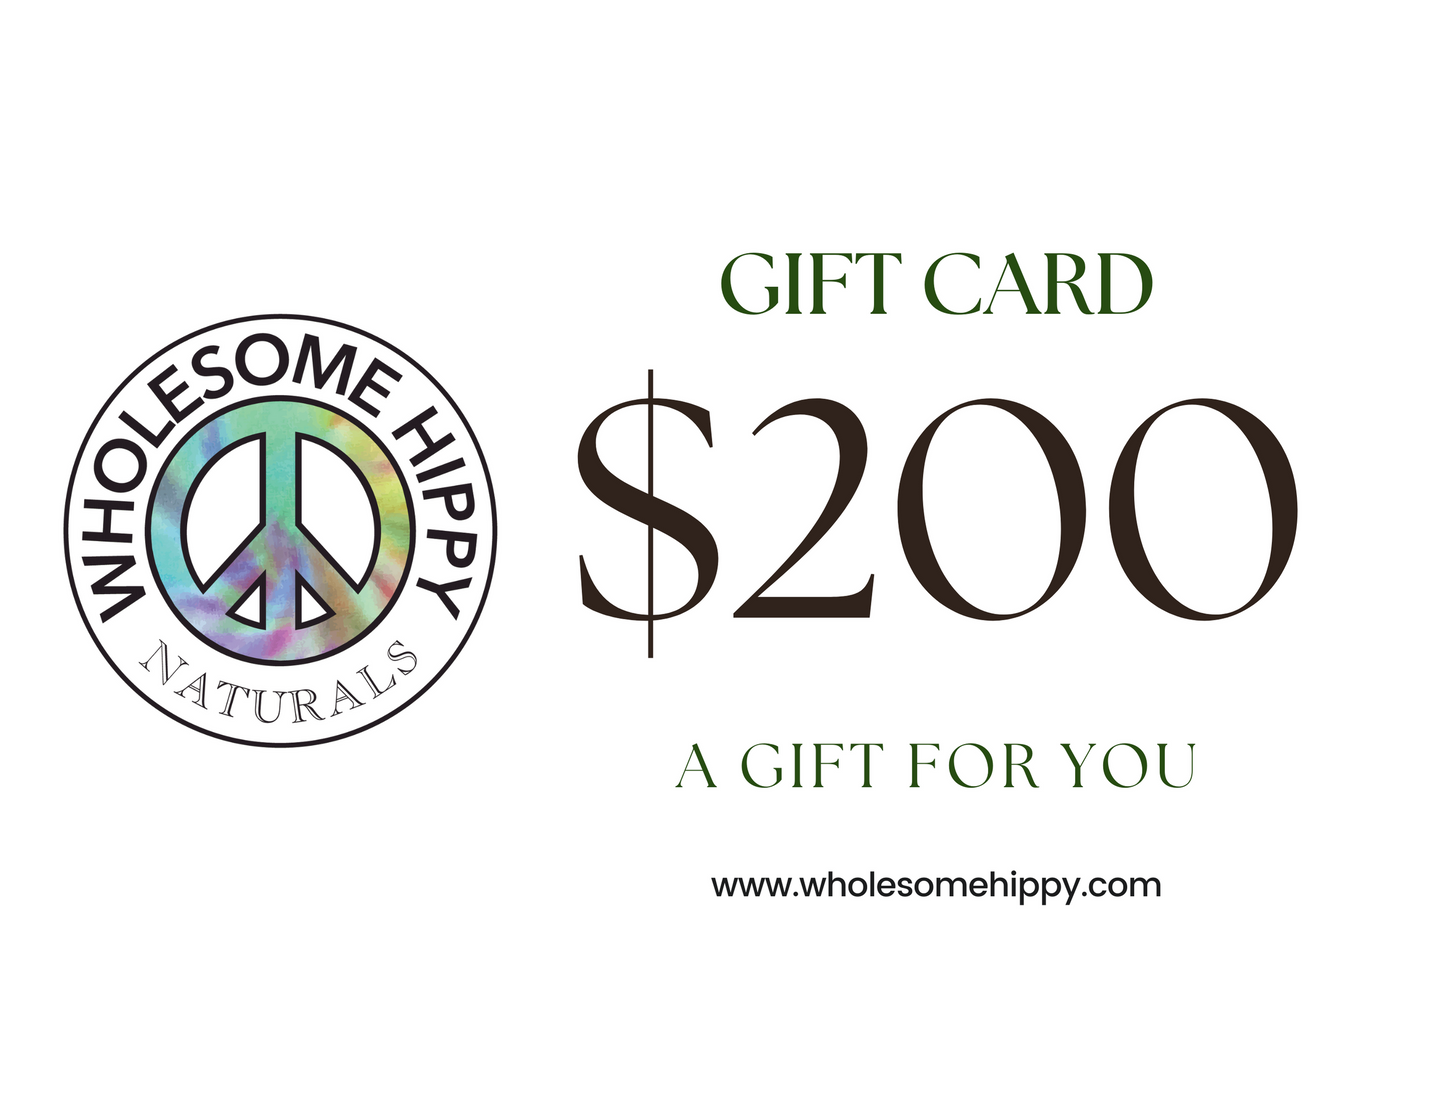 Wholesome Hippy Gift Card